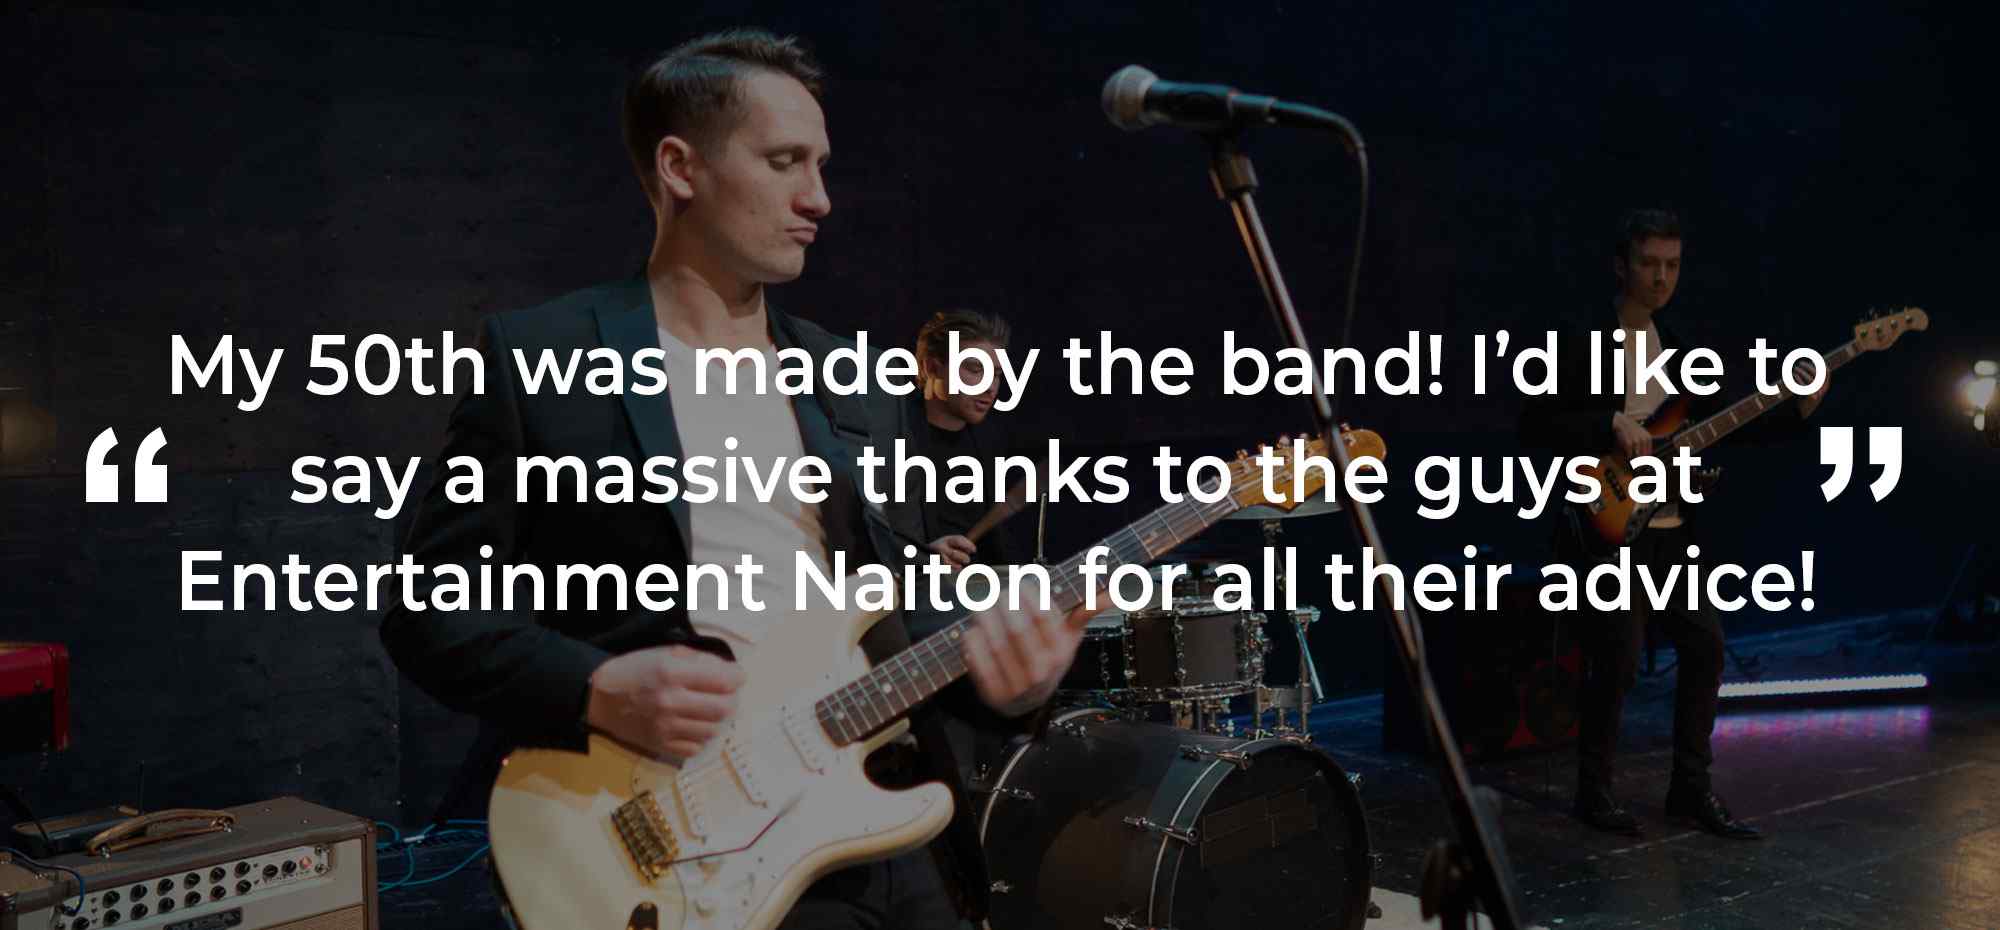 Client Review of a Party Band Kent